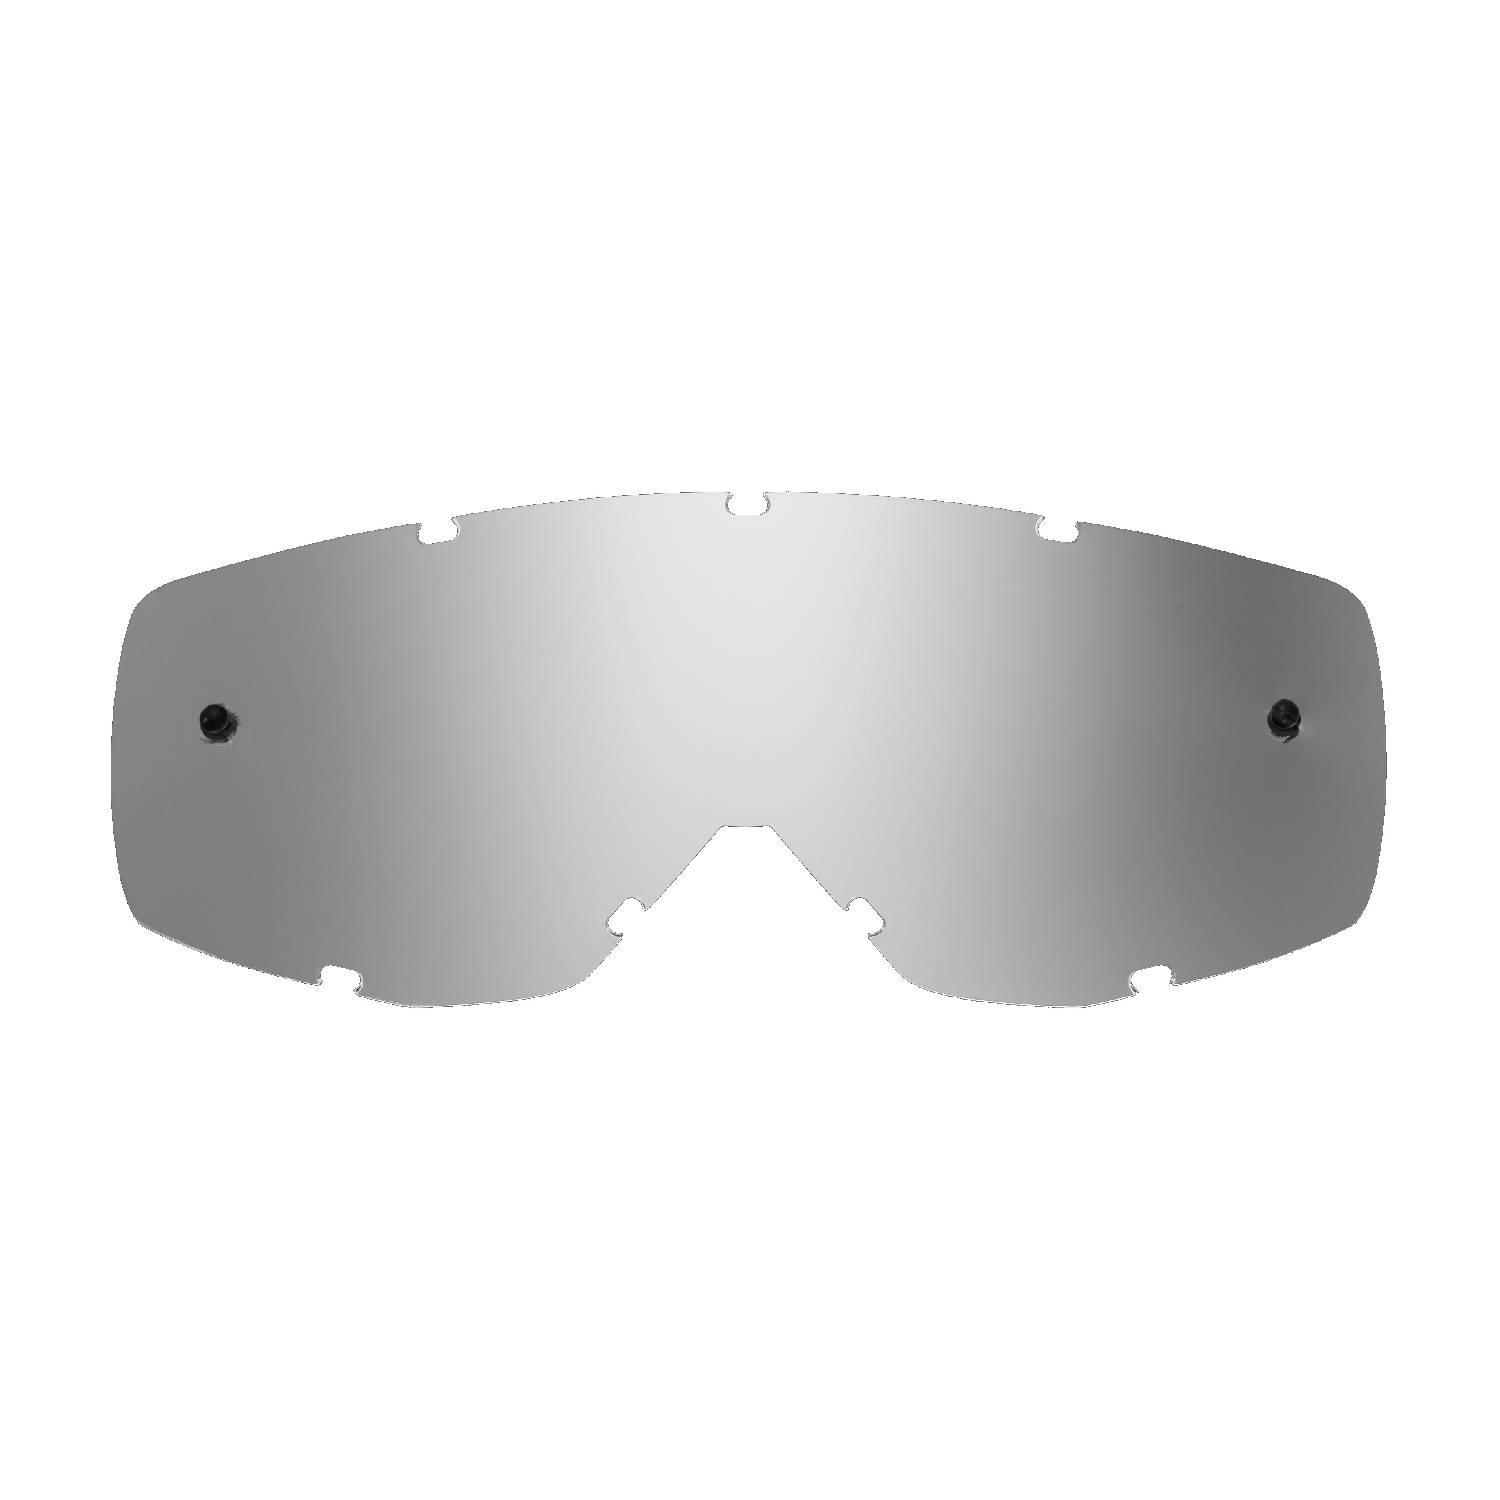 silver-toned mirrored replacement lenses for goggles compatible for Scott Hustle/ Primal / Tyrant / Split goggle